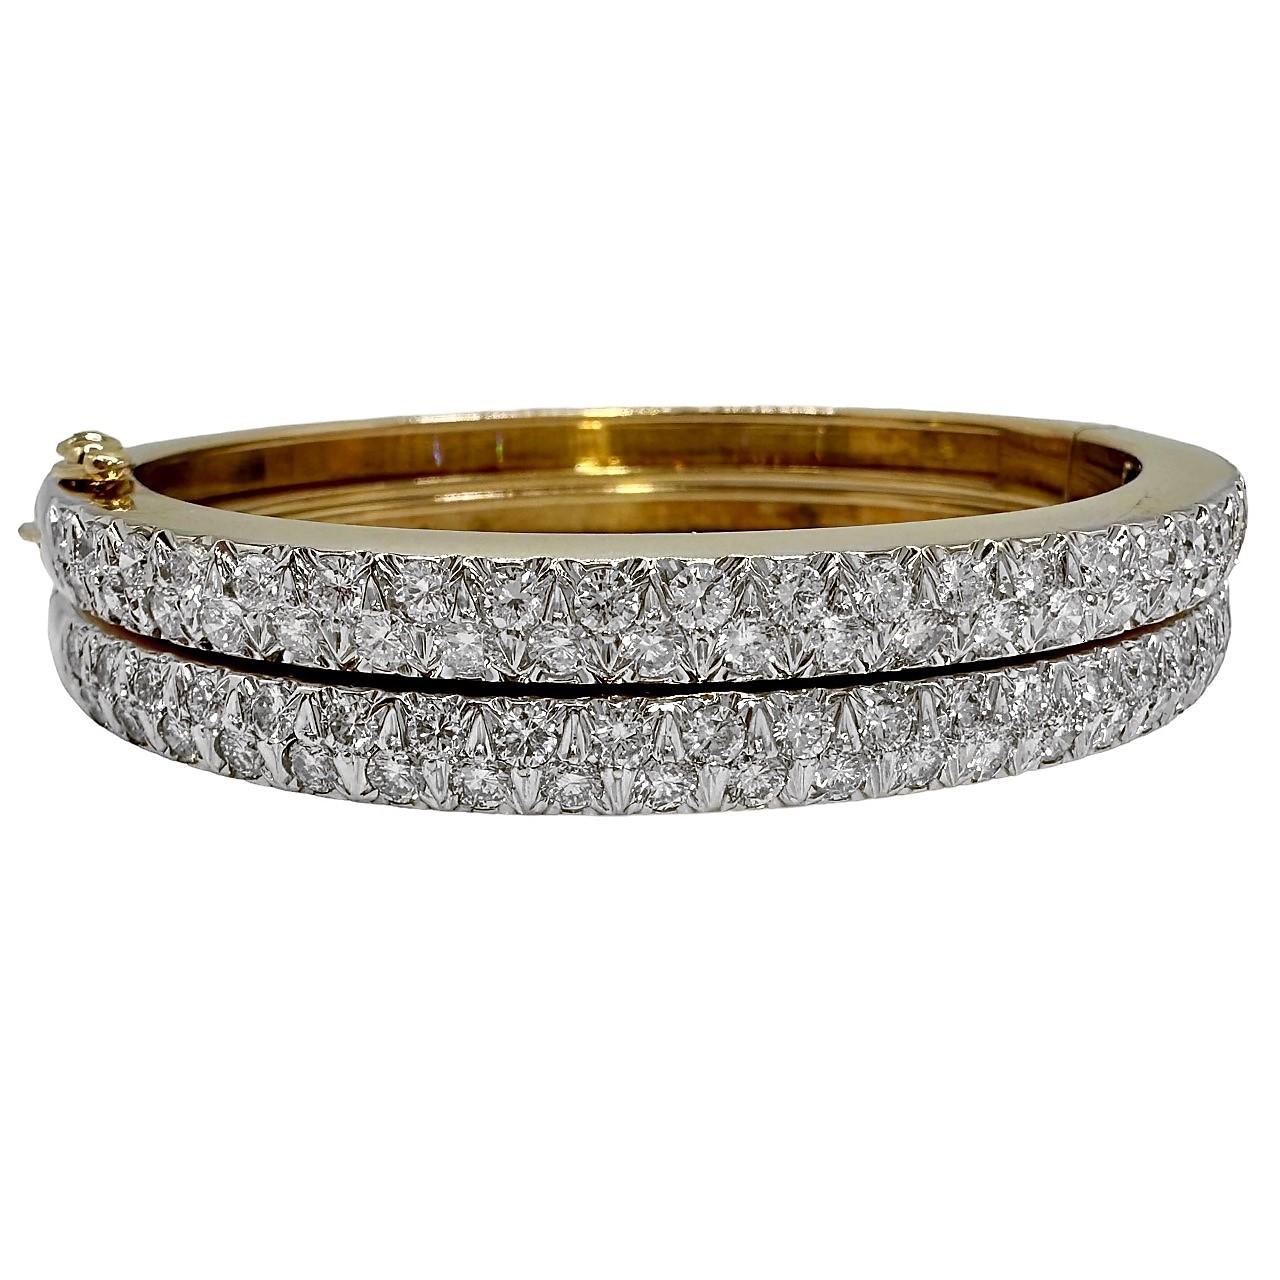 A matched pair of oval shaped, 14K Yellow Gold bangles, set on top with 88 round brilliant cut diamonds, weighing an approximate total of 5CT of G Color and VS1 Clarity.  The oval shape contours to the wrist, so that the diamonds will always be